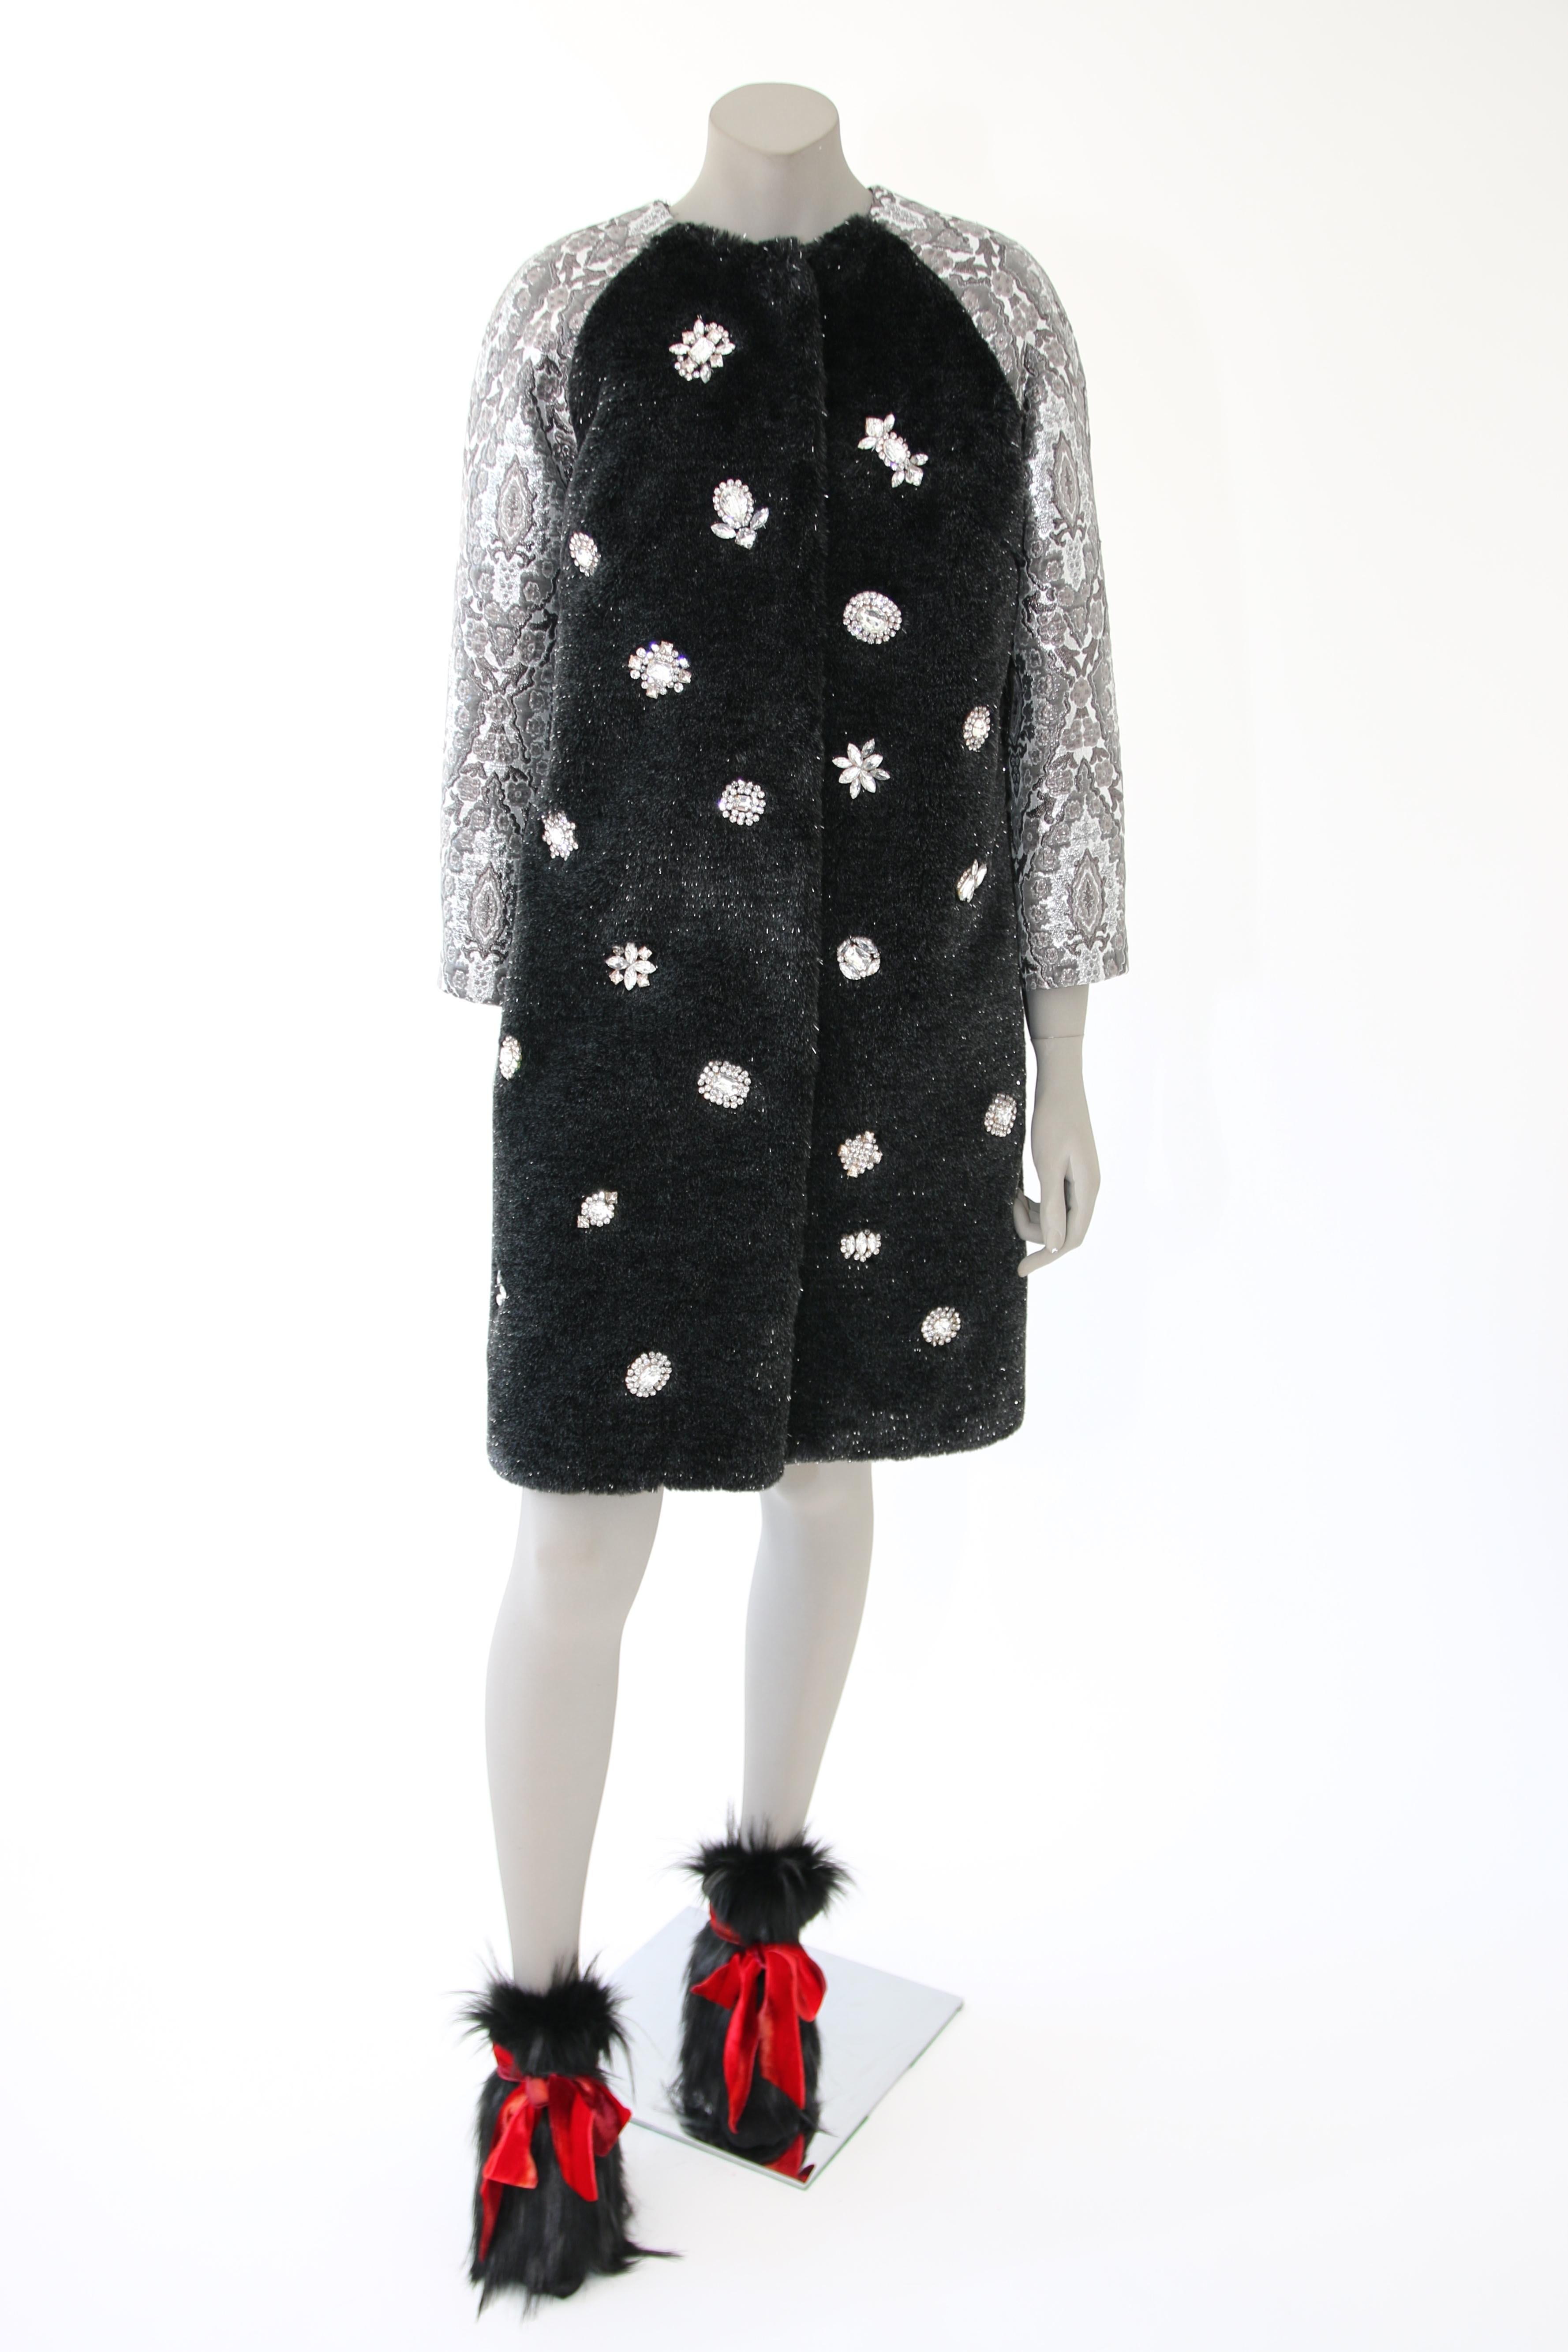 The Lulu Pelush black faux fur mink coat with vintage crystals and silver Damask brocade sleeves, is a one of a kind exclusive piece. Featuring the highest quality man made pelage, this extraordinary and unique fake faux fur coat is a beautiful